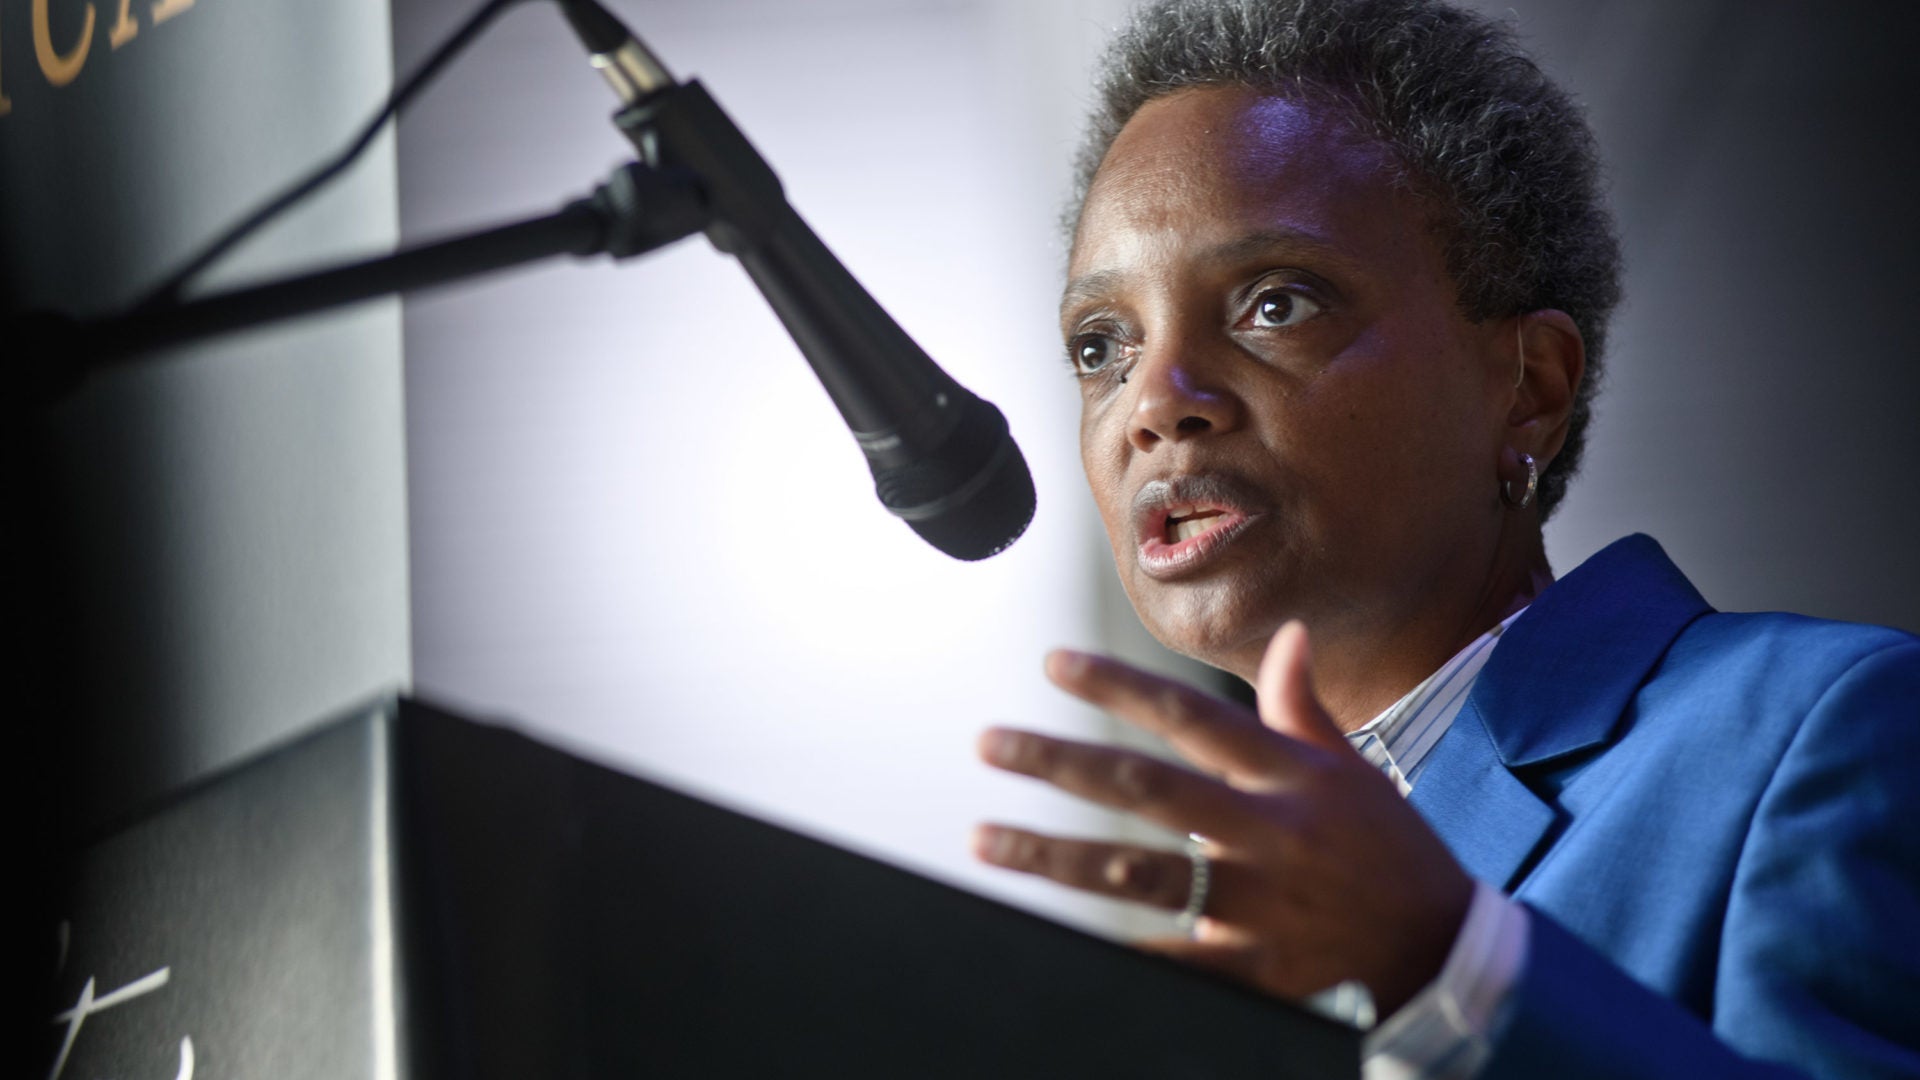 Chicago Mayor Lori Lightfoot Fires Police Superintendent Eddie Johnson: ‘He Intentionally Lied To Me’